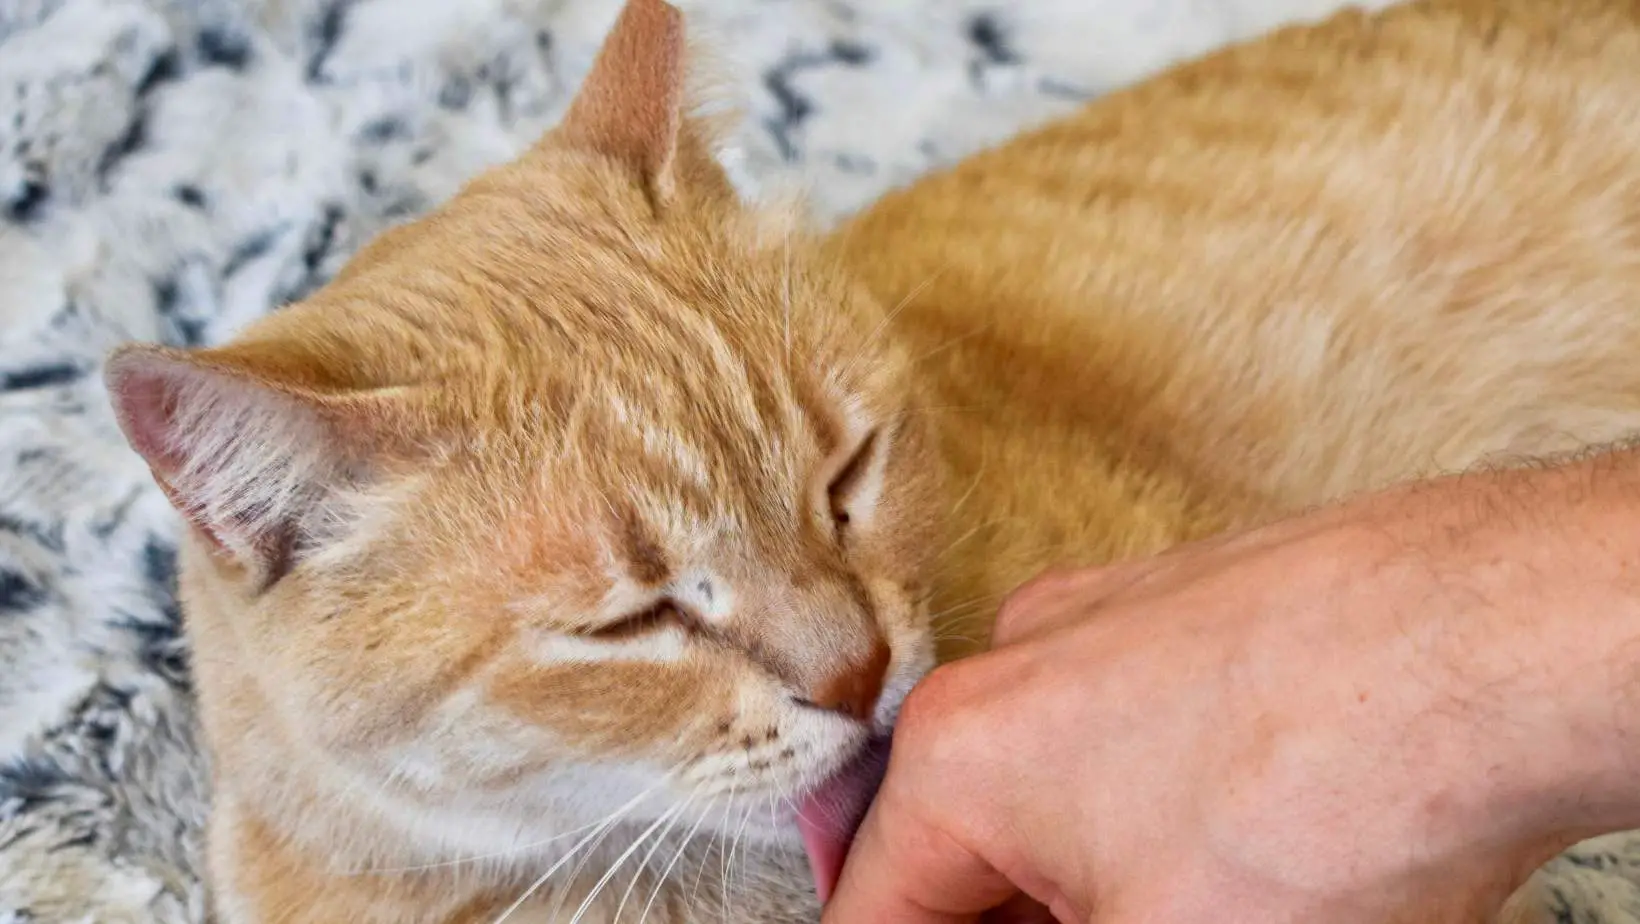 What does it mean when your cat licks you?